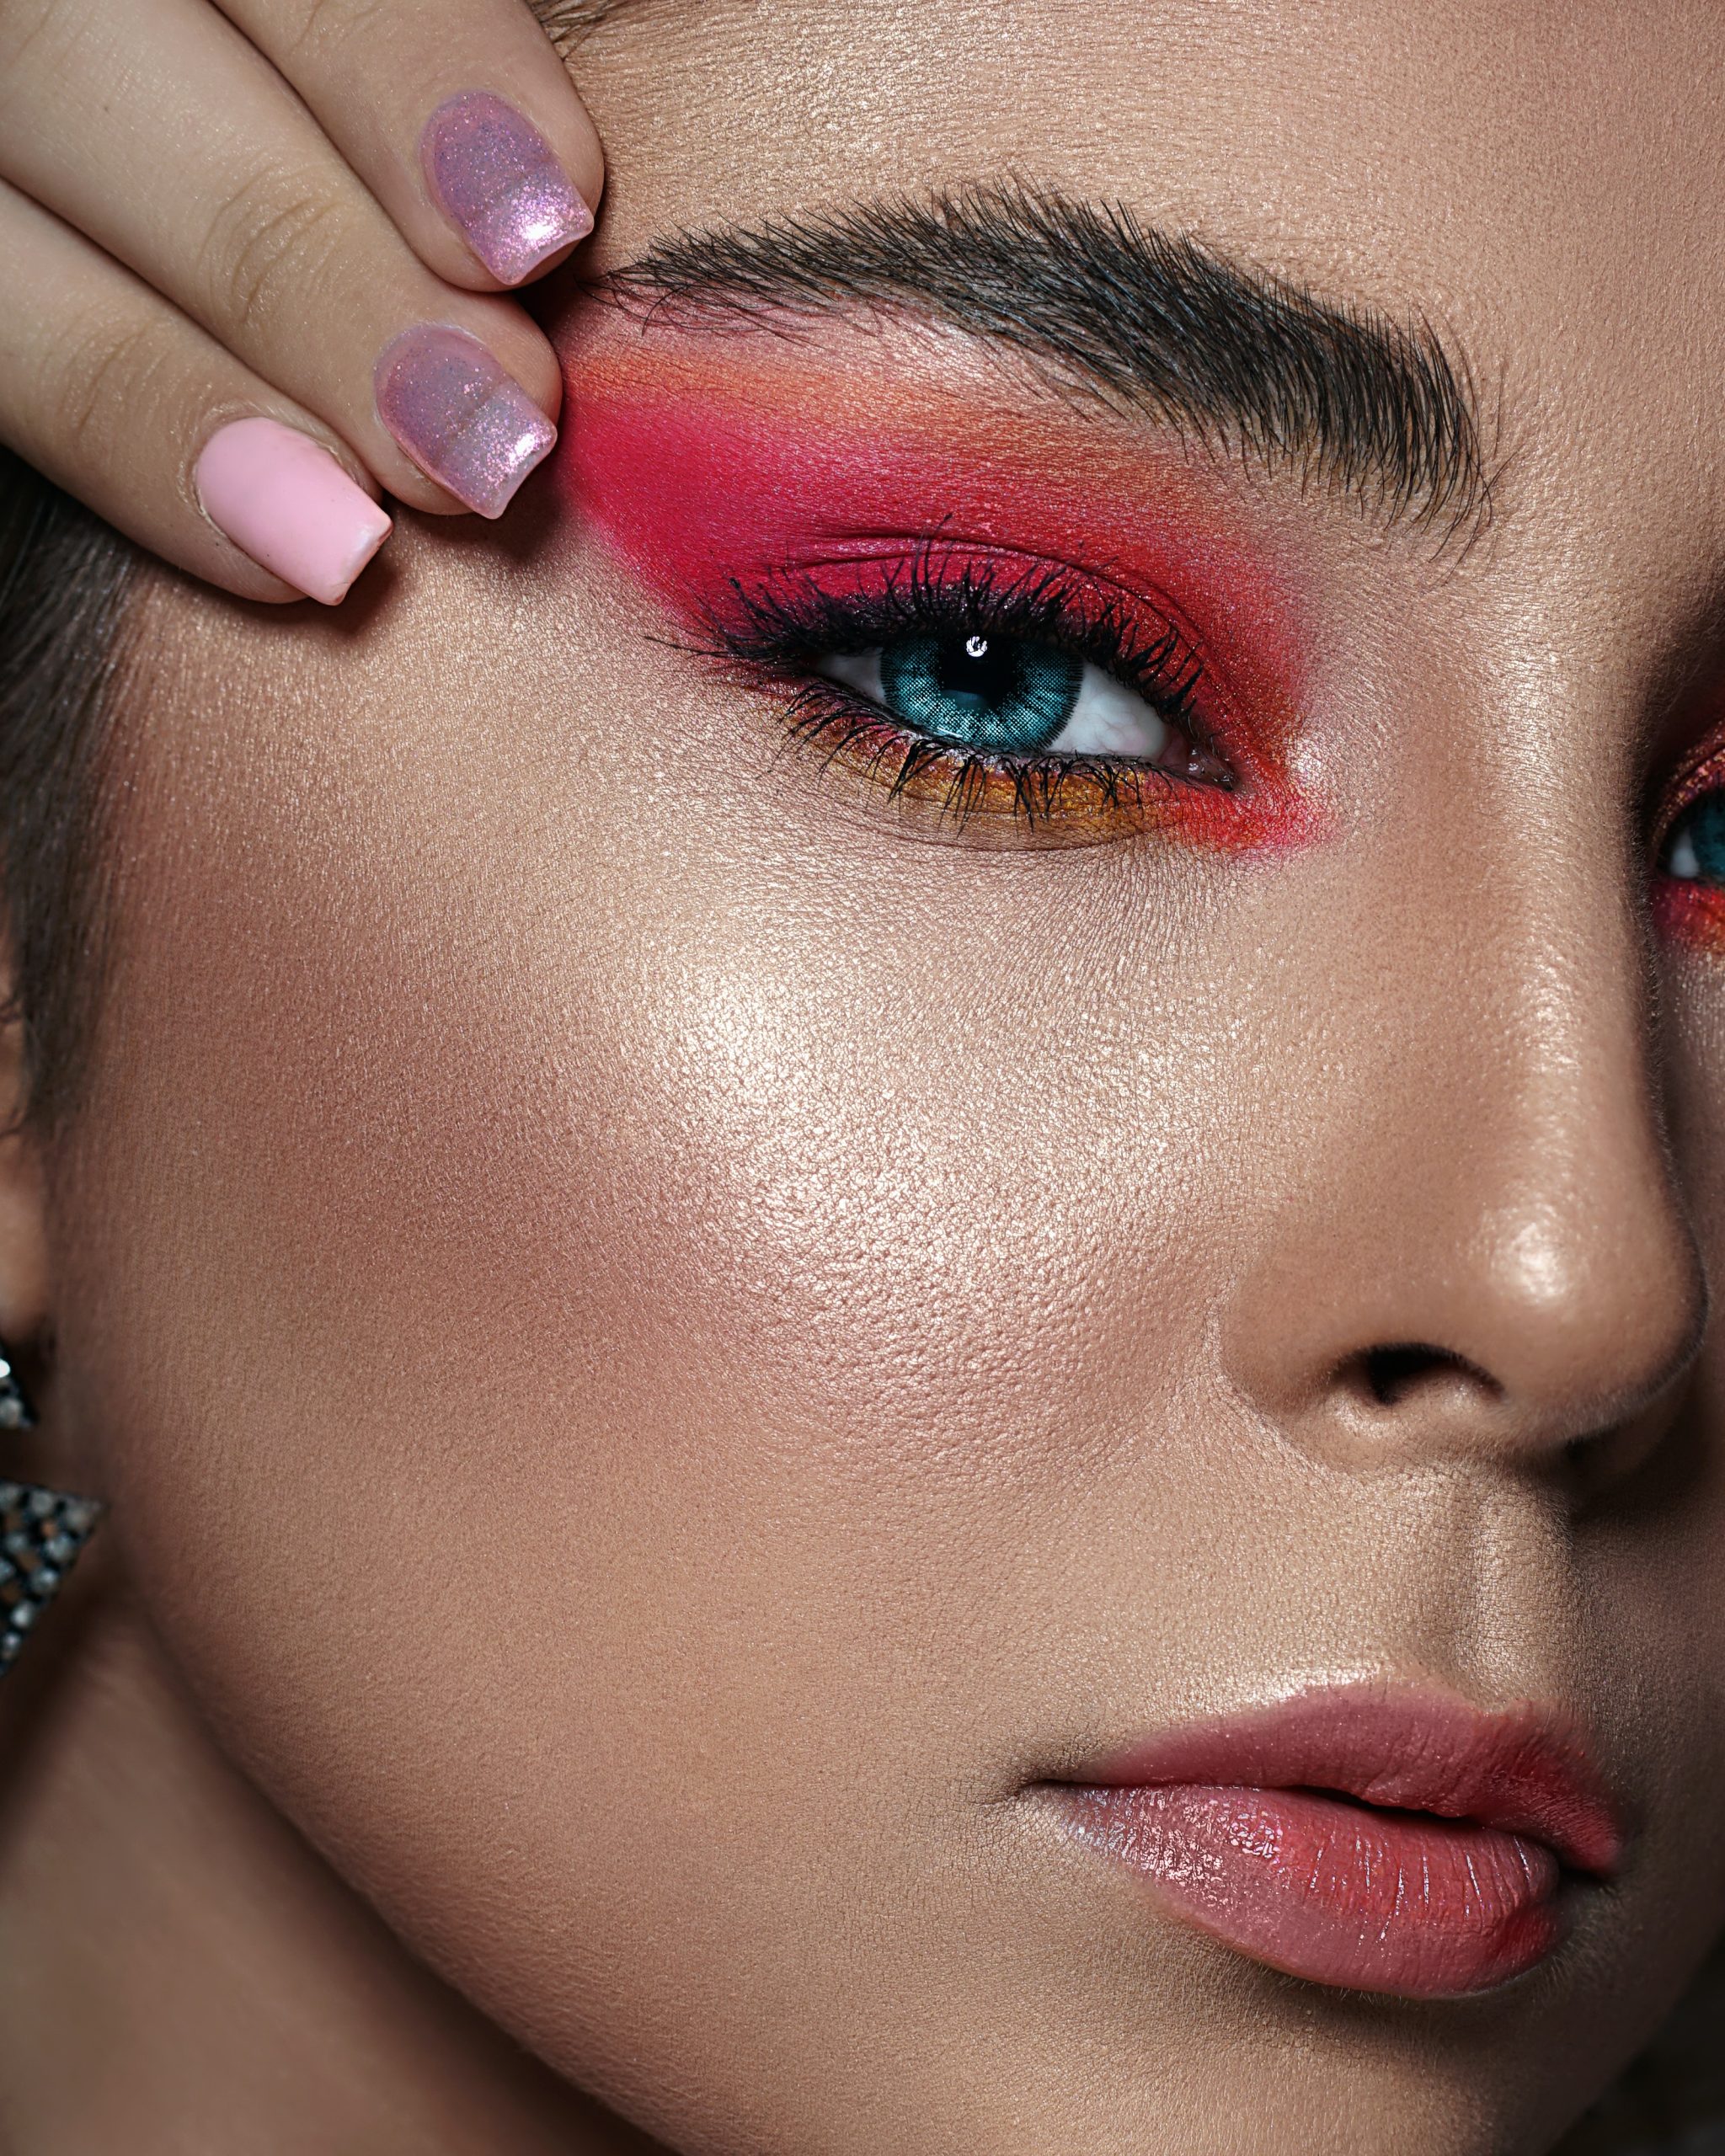 Vibrant Eye Makeup Looks That Will Make a Statement